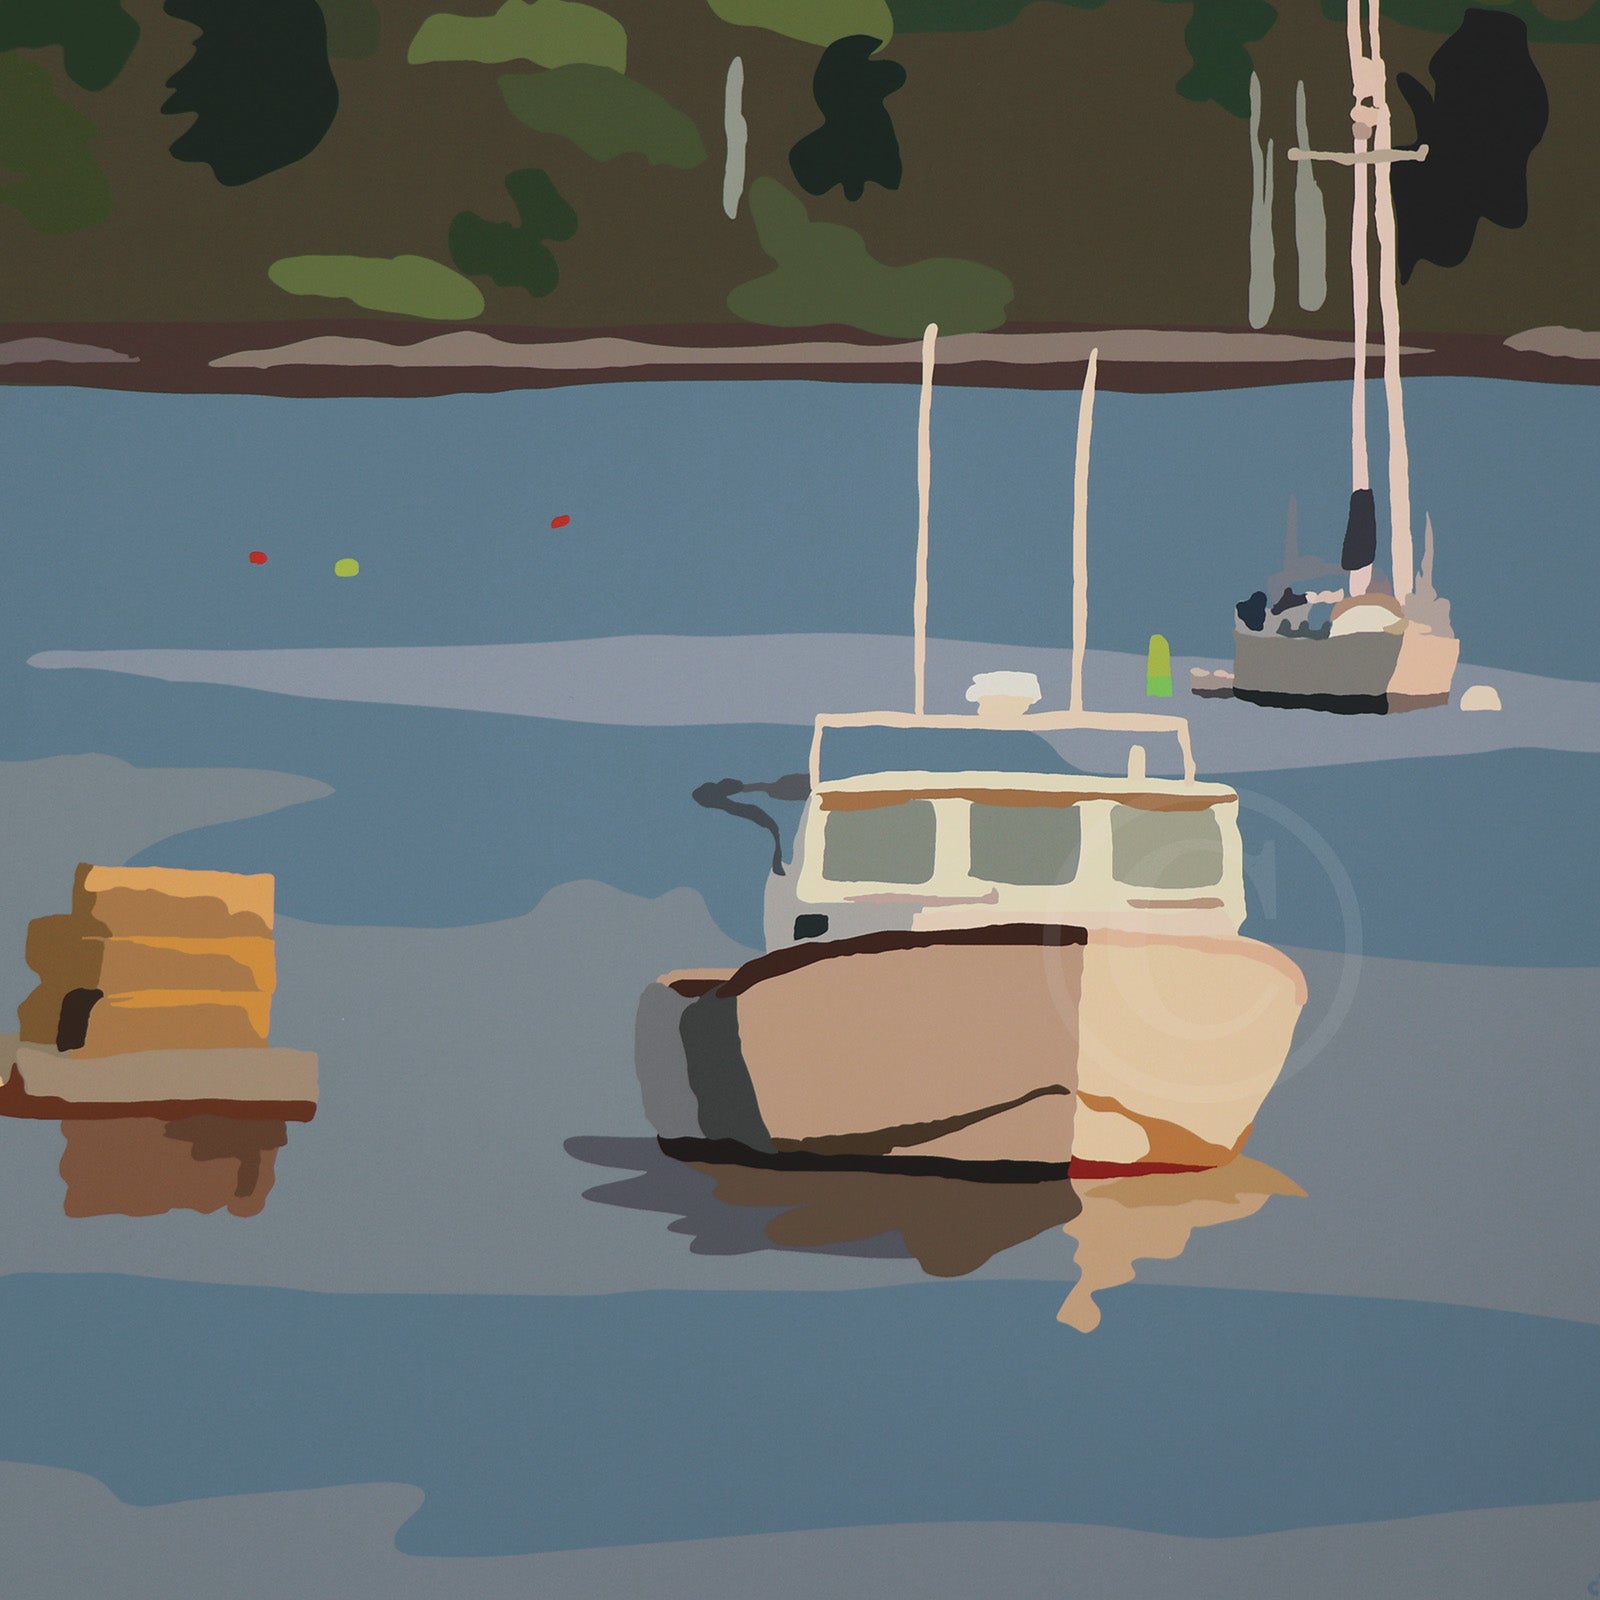 Lobster Boat in Round Pond Harbor Art Print 18" x 24" Horizontal Wall Poster By Alan Claude - Maine